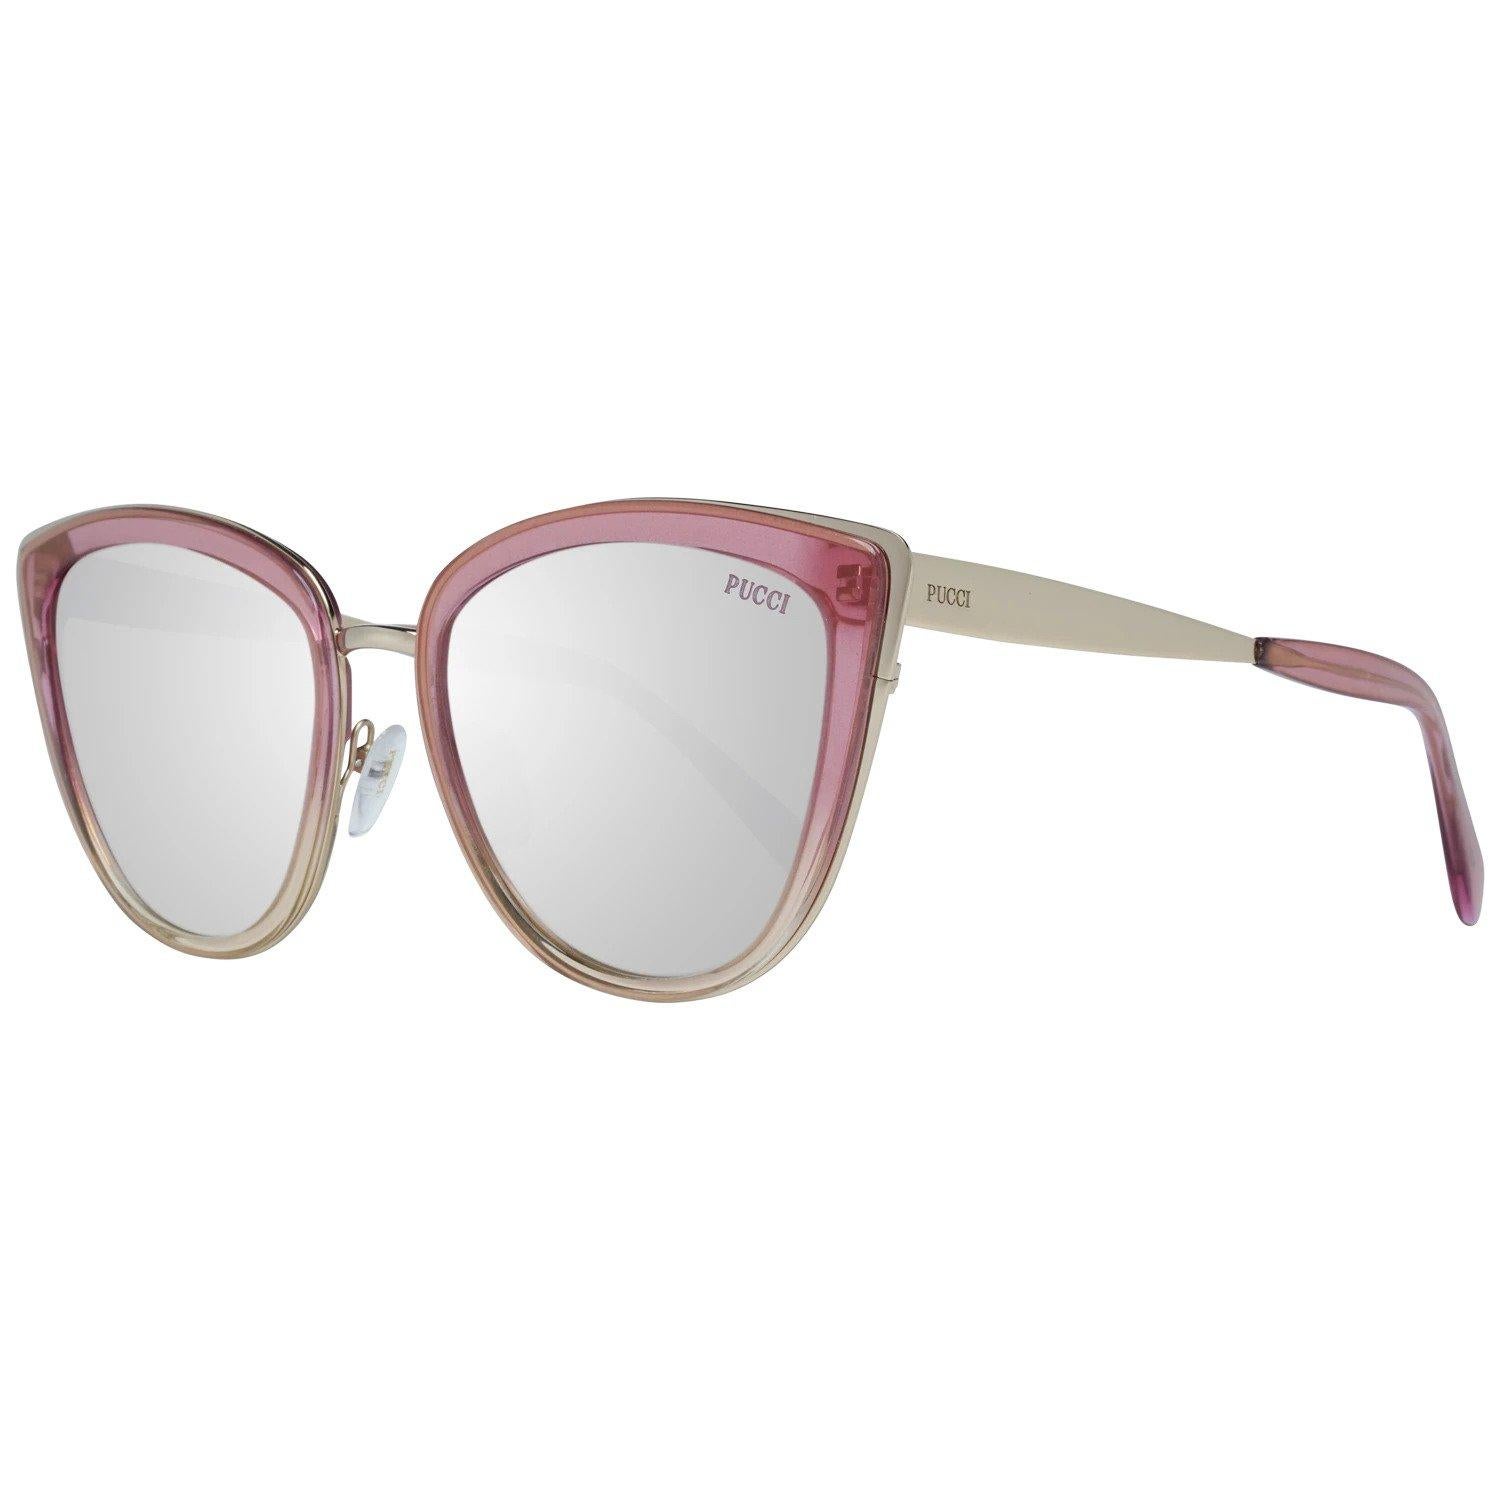 Details

MATERIAL: Metal

COLOR: Pink

MODEL: EP0092 5574G

GENDER: Women

COUNTRY OF MANUFACTURE: Italy

TYPE: Sunglasses

ORIGINAL CASE?: Yes

STYLE: Cats Eyes

OCCASION: Casual

FEATURES: Lightweight

LENS COLOR: Silver

LENS TECHNOLOGY: